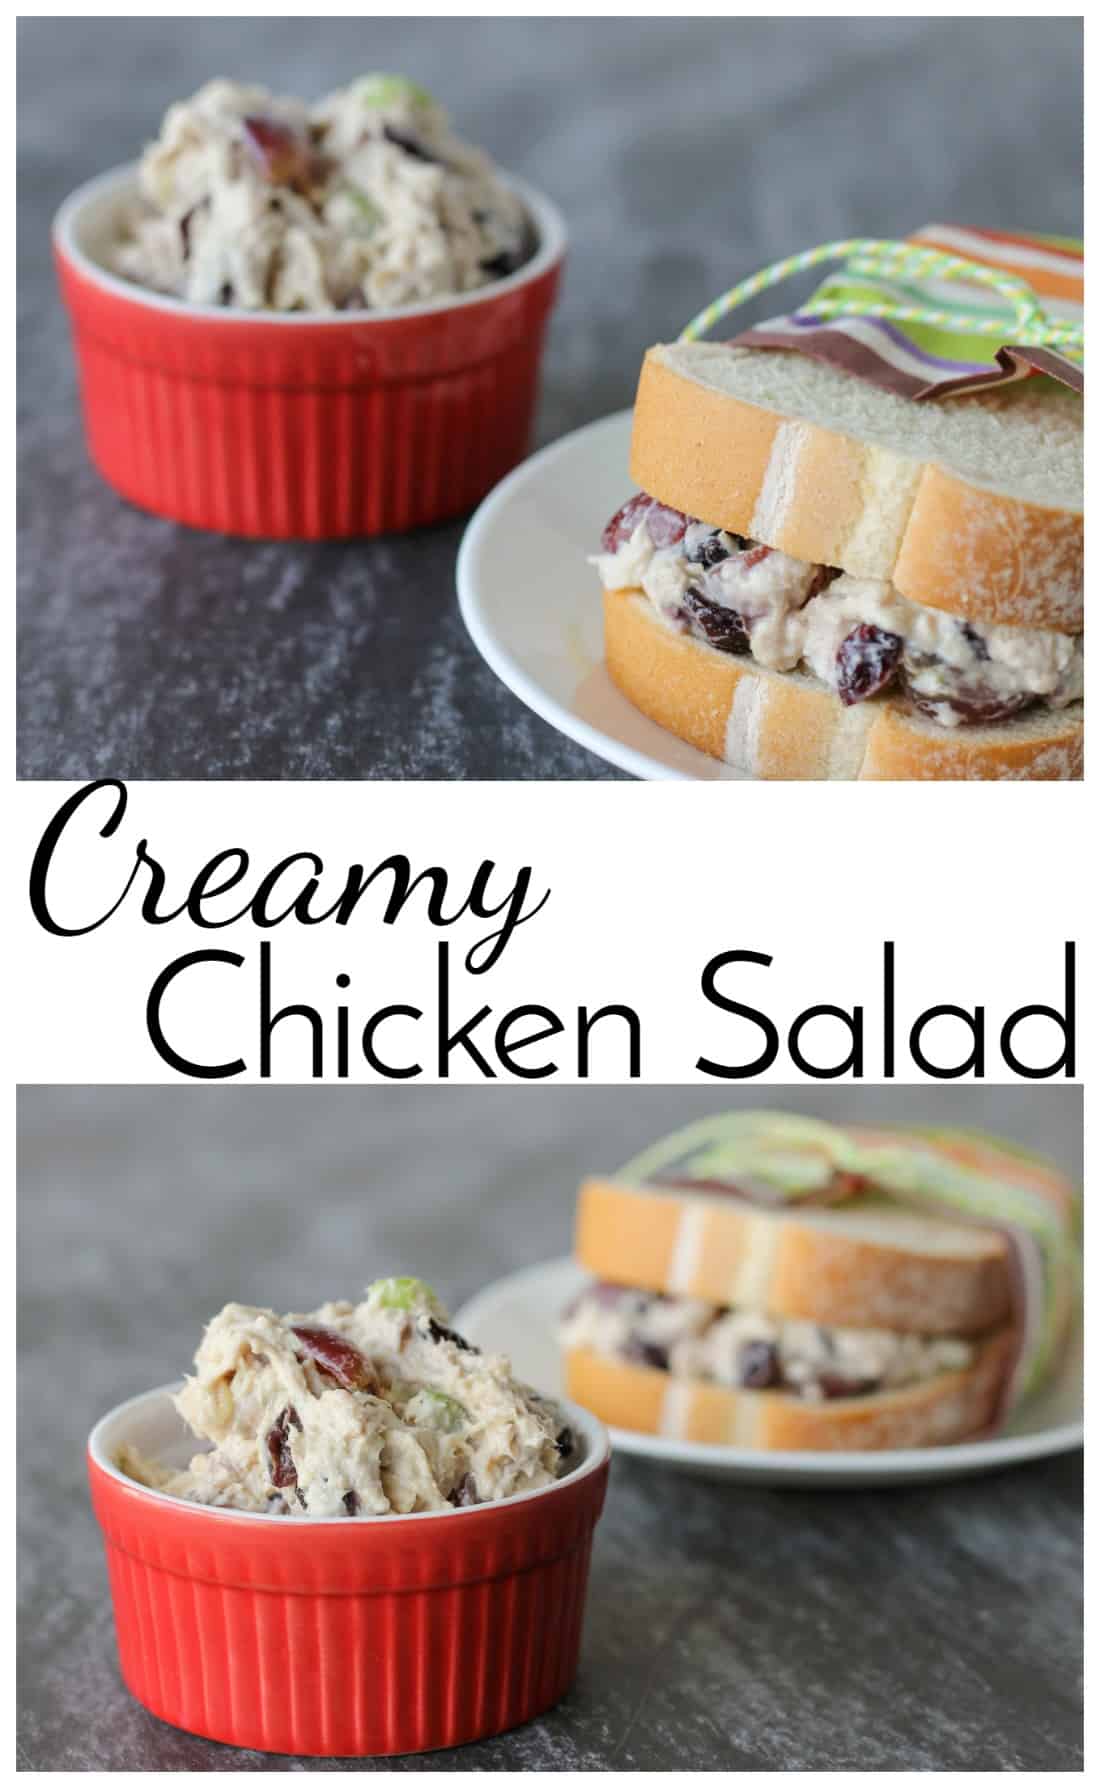 Creamy Chicken Salad is a delicious lunch option and a great way to use up leftover chicken. Don't forget all the yummy add-ins that make this recipe unique! via @nmburk